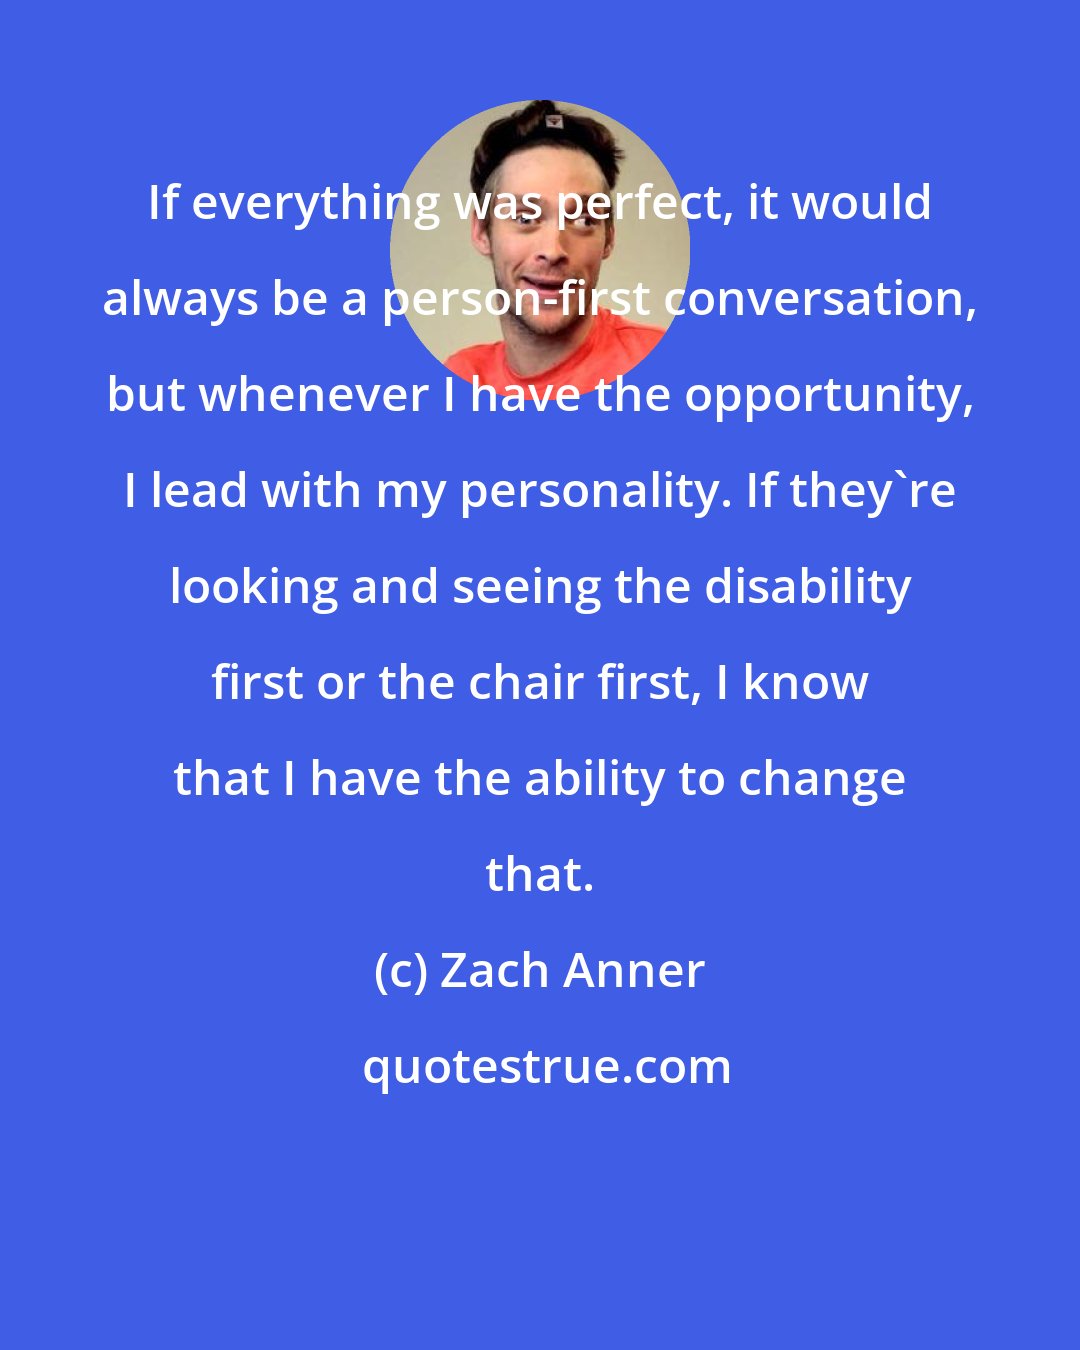 Zach Anner: If everything was perfect, it would always be a person-first conversation, but whenever I have the opportunity, I lead with my personality. If they're looking and seeing the disability first or the chair first, I know that I have the ability to change that.